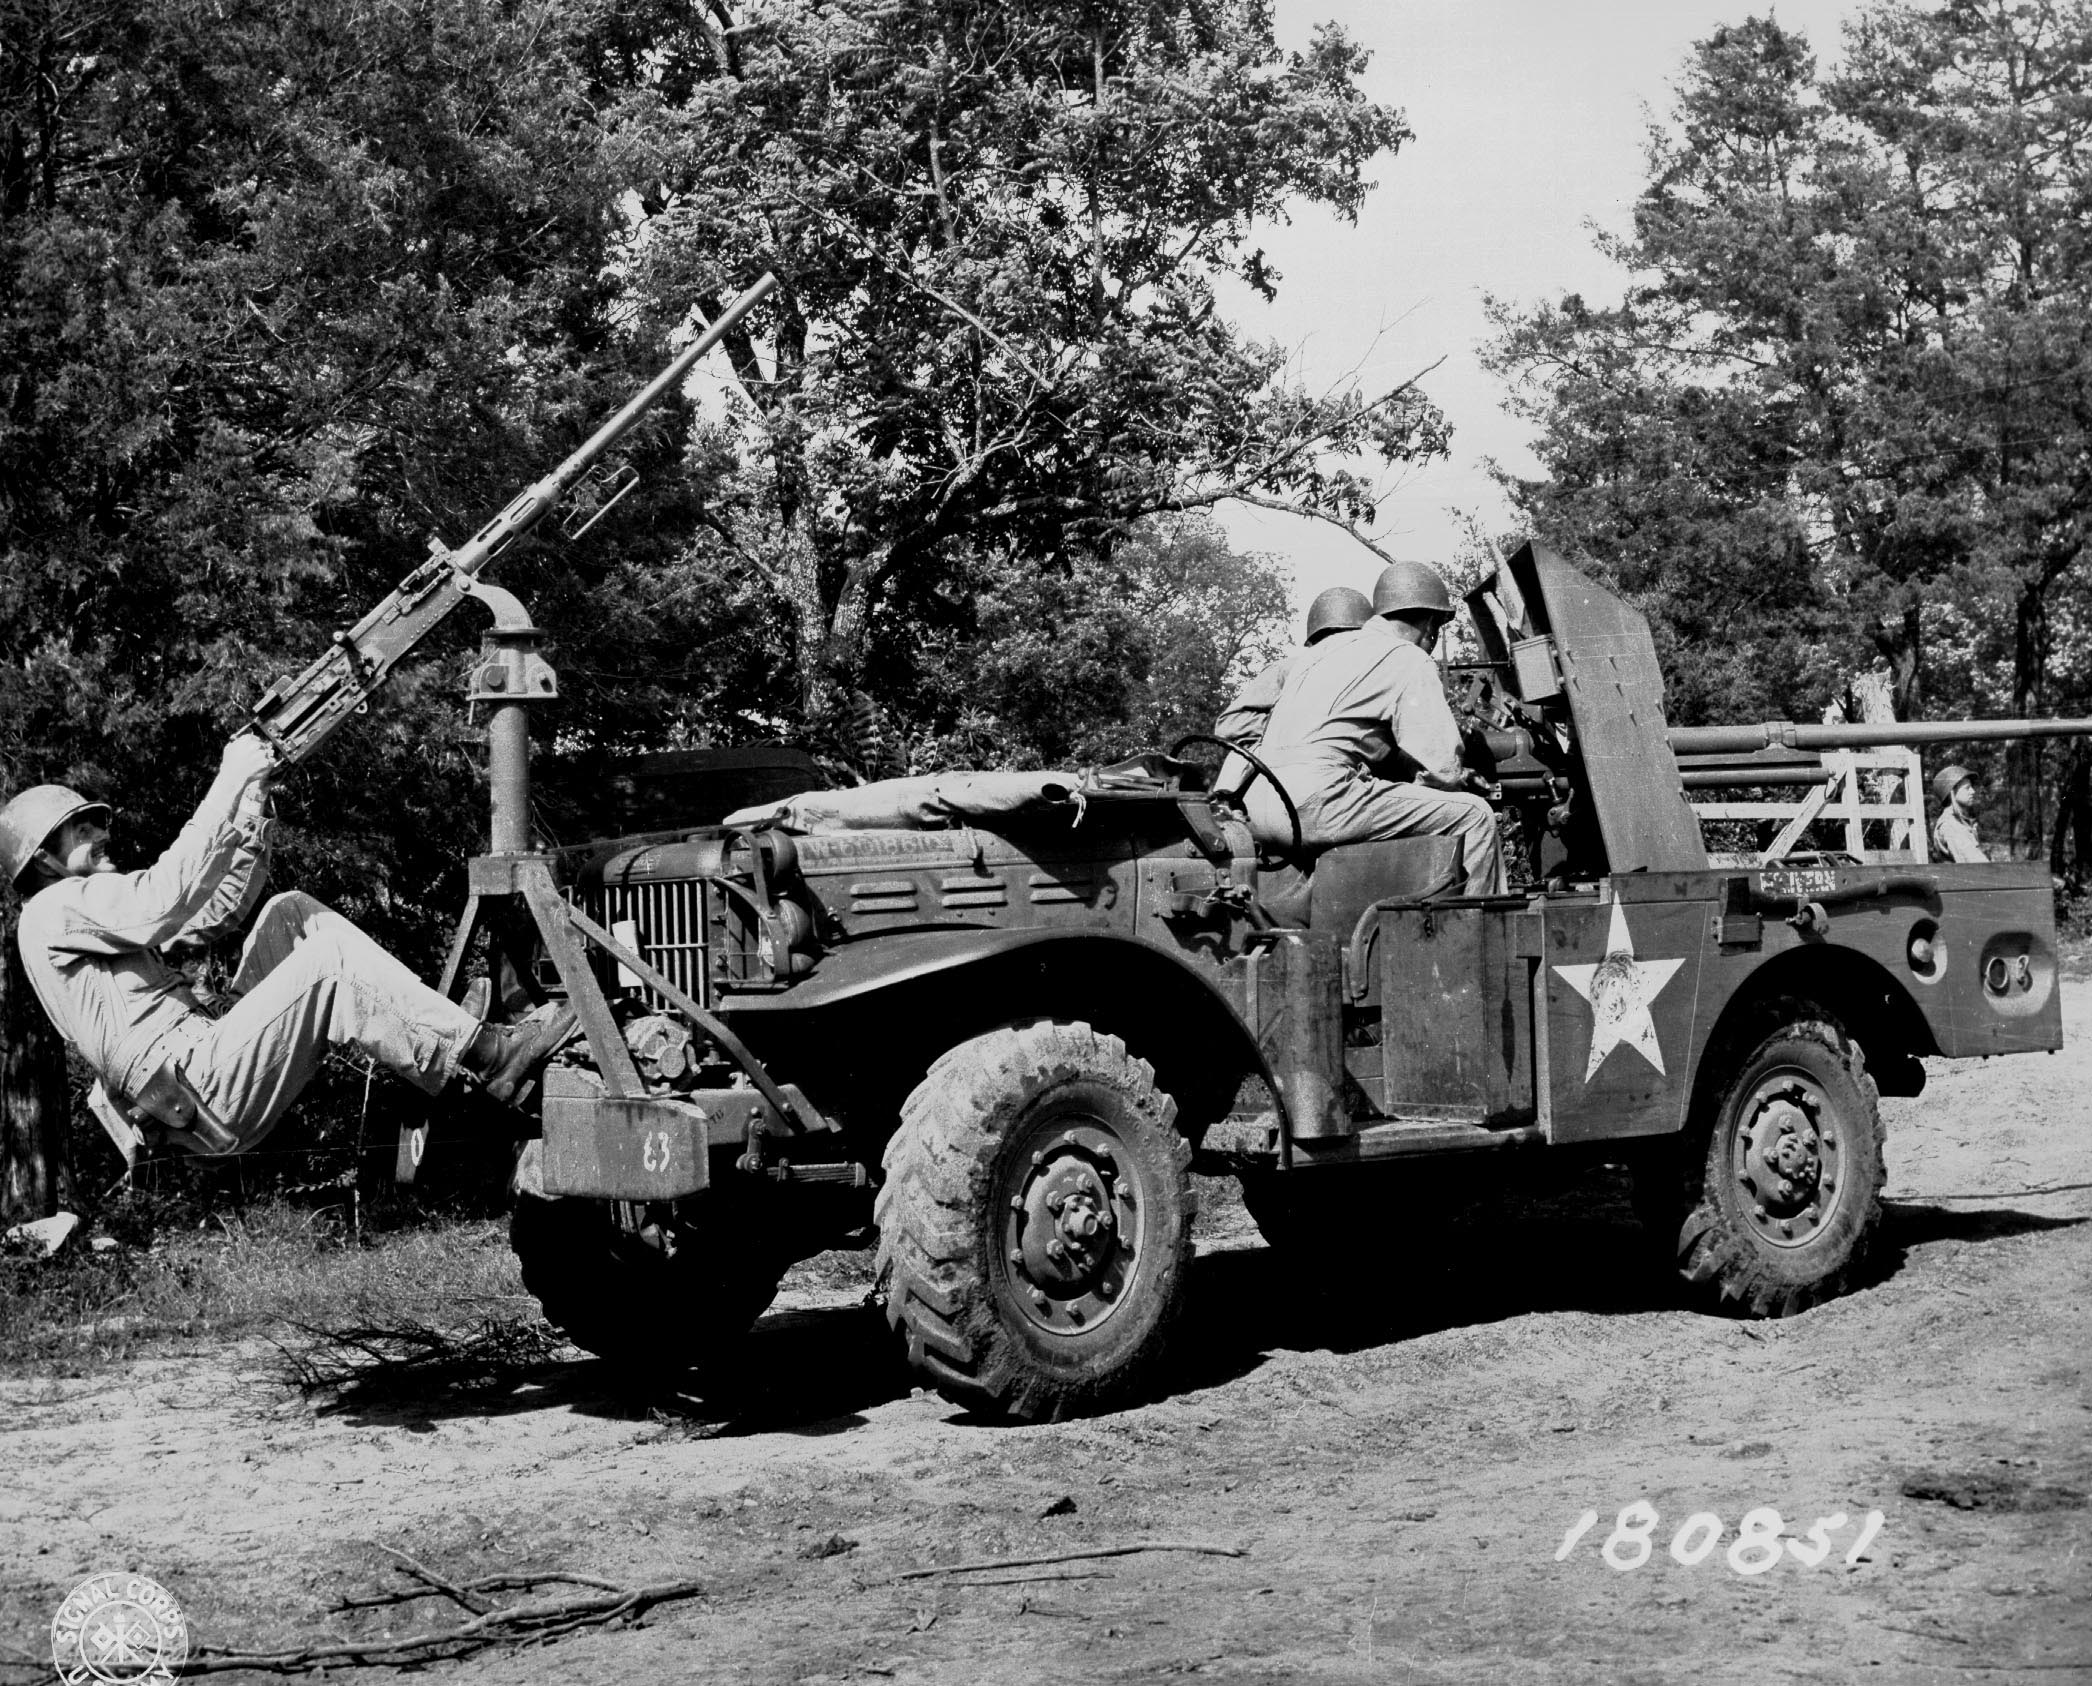 37 mm Gun M3 mounted aboard a M6 Gun Motor Carriage, with additional .50 cal machine gun attached, 3 miles west of Watertown, Tennessee, United States, 6 Jun 1943